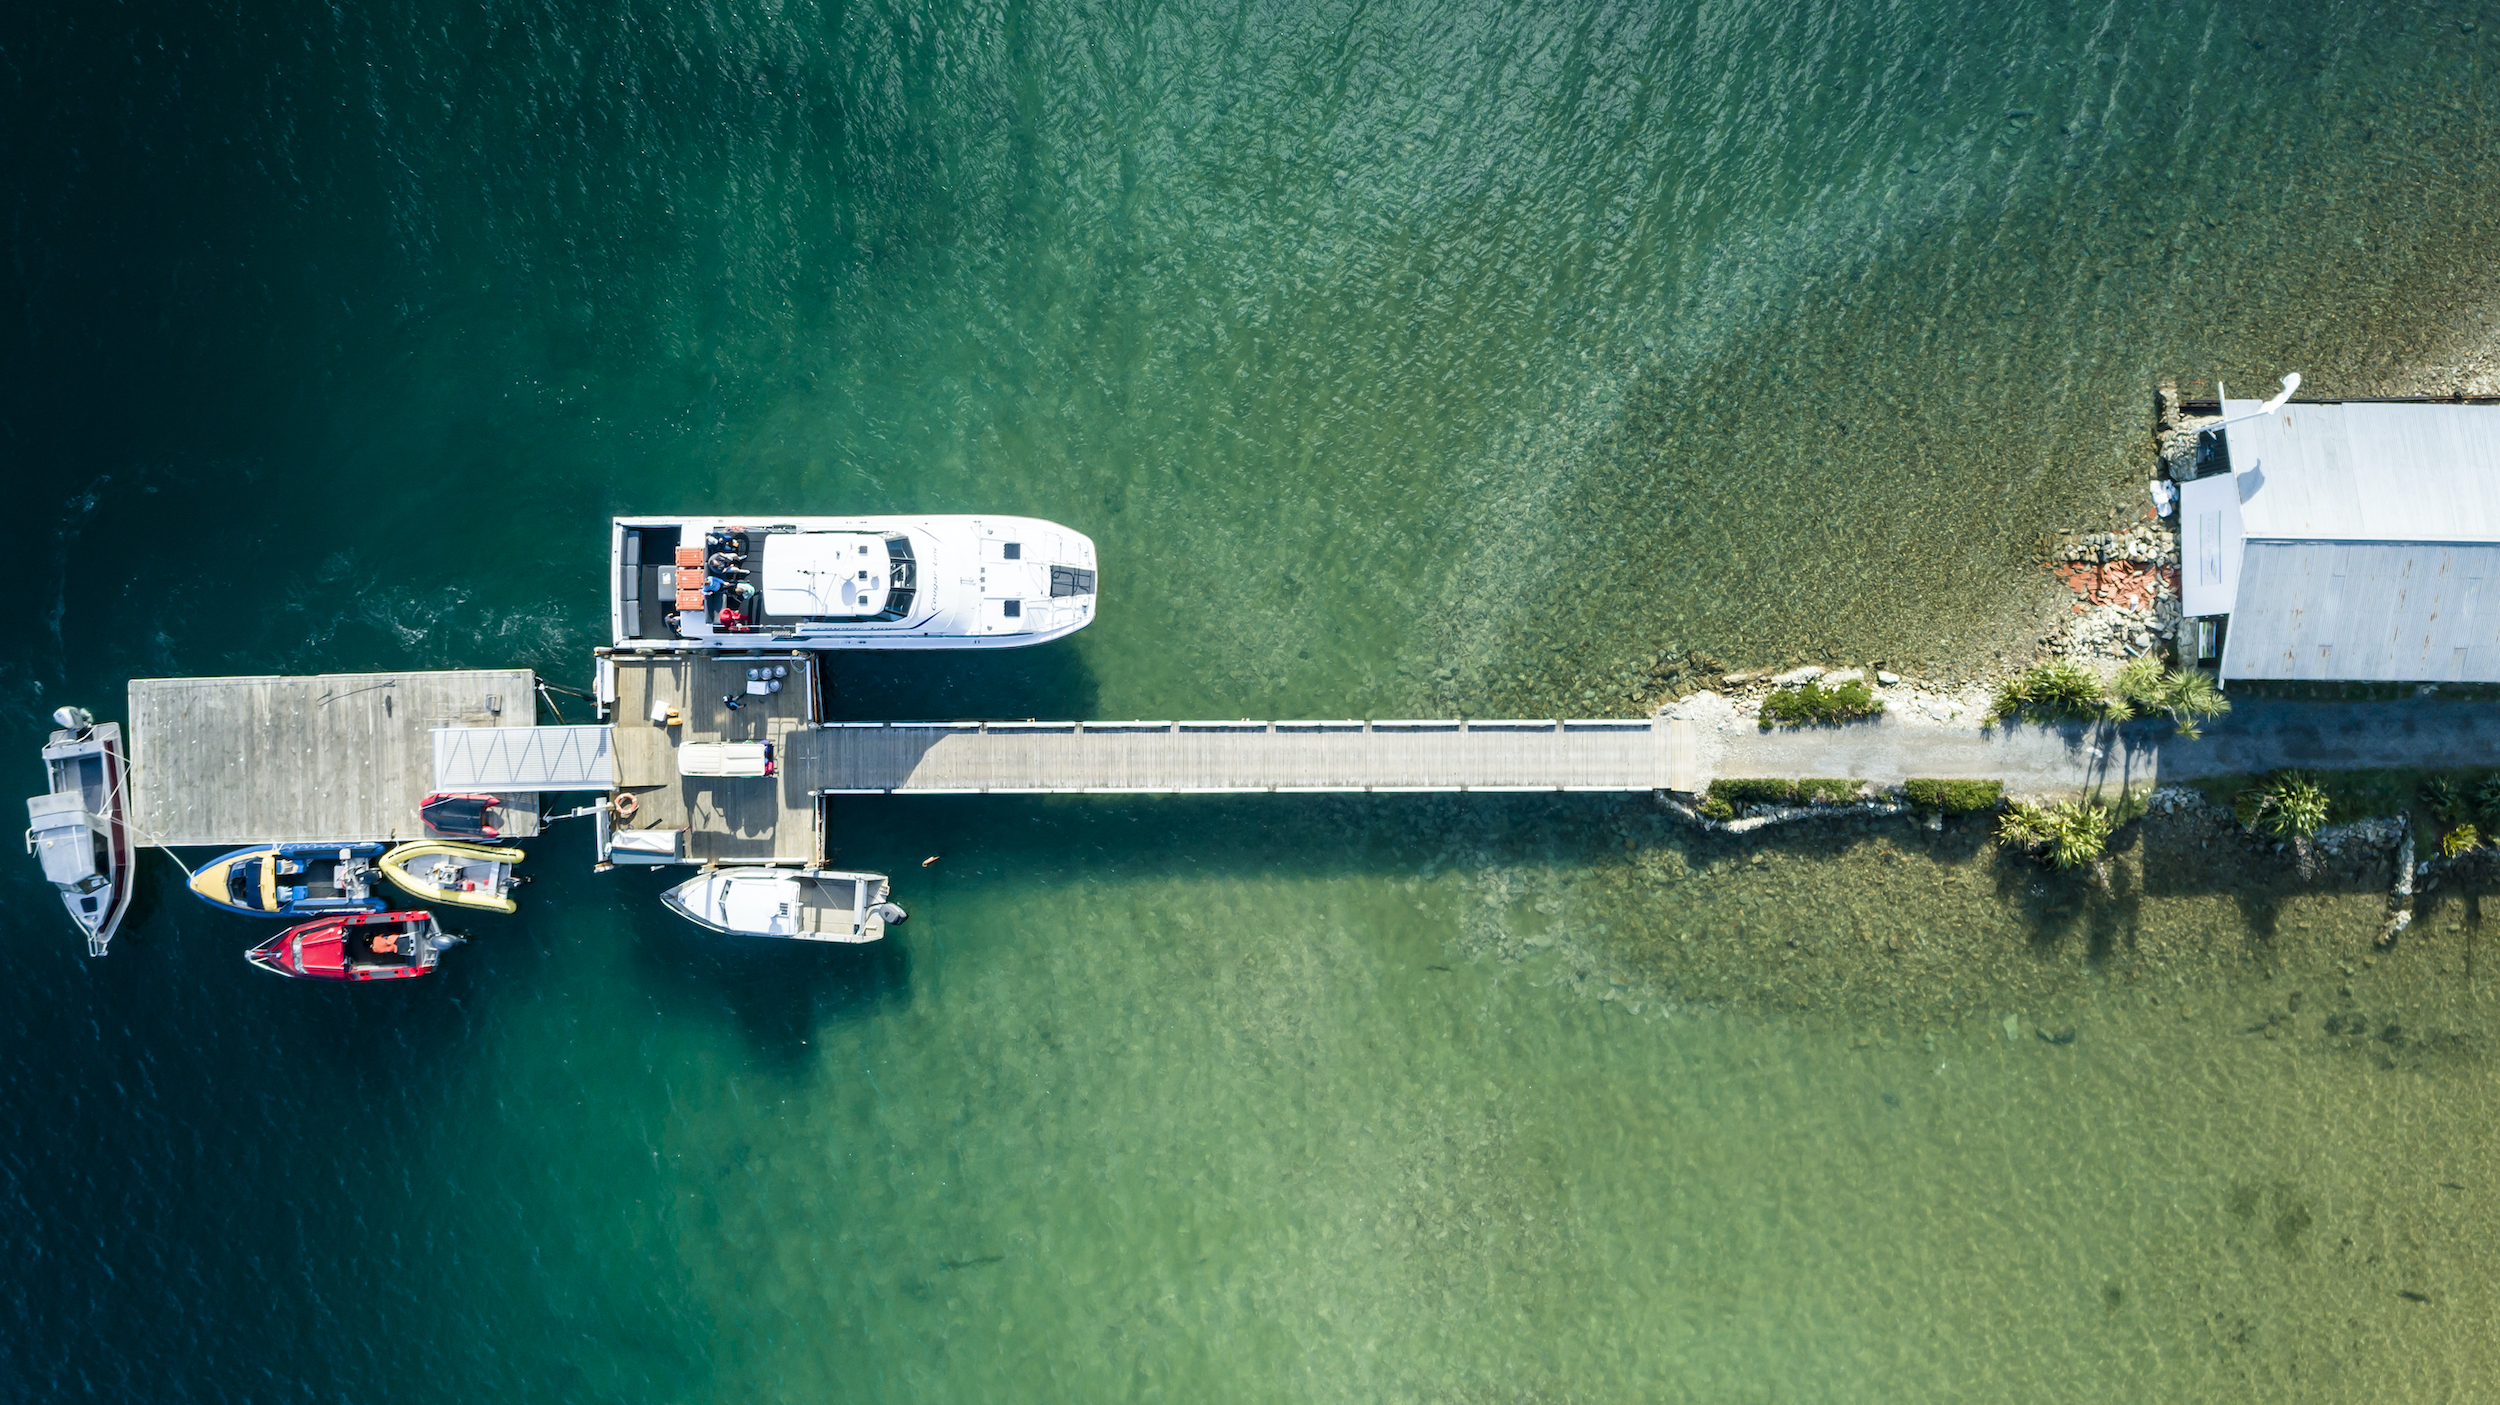 An aerial view of the Furneaux Lodge jetty, boat shed, Cougar Line boat and smaller boats in the Marlborough Sounds, New Zealand.